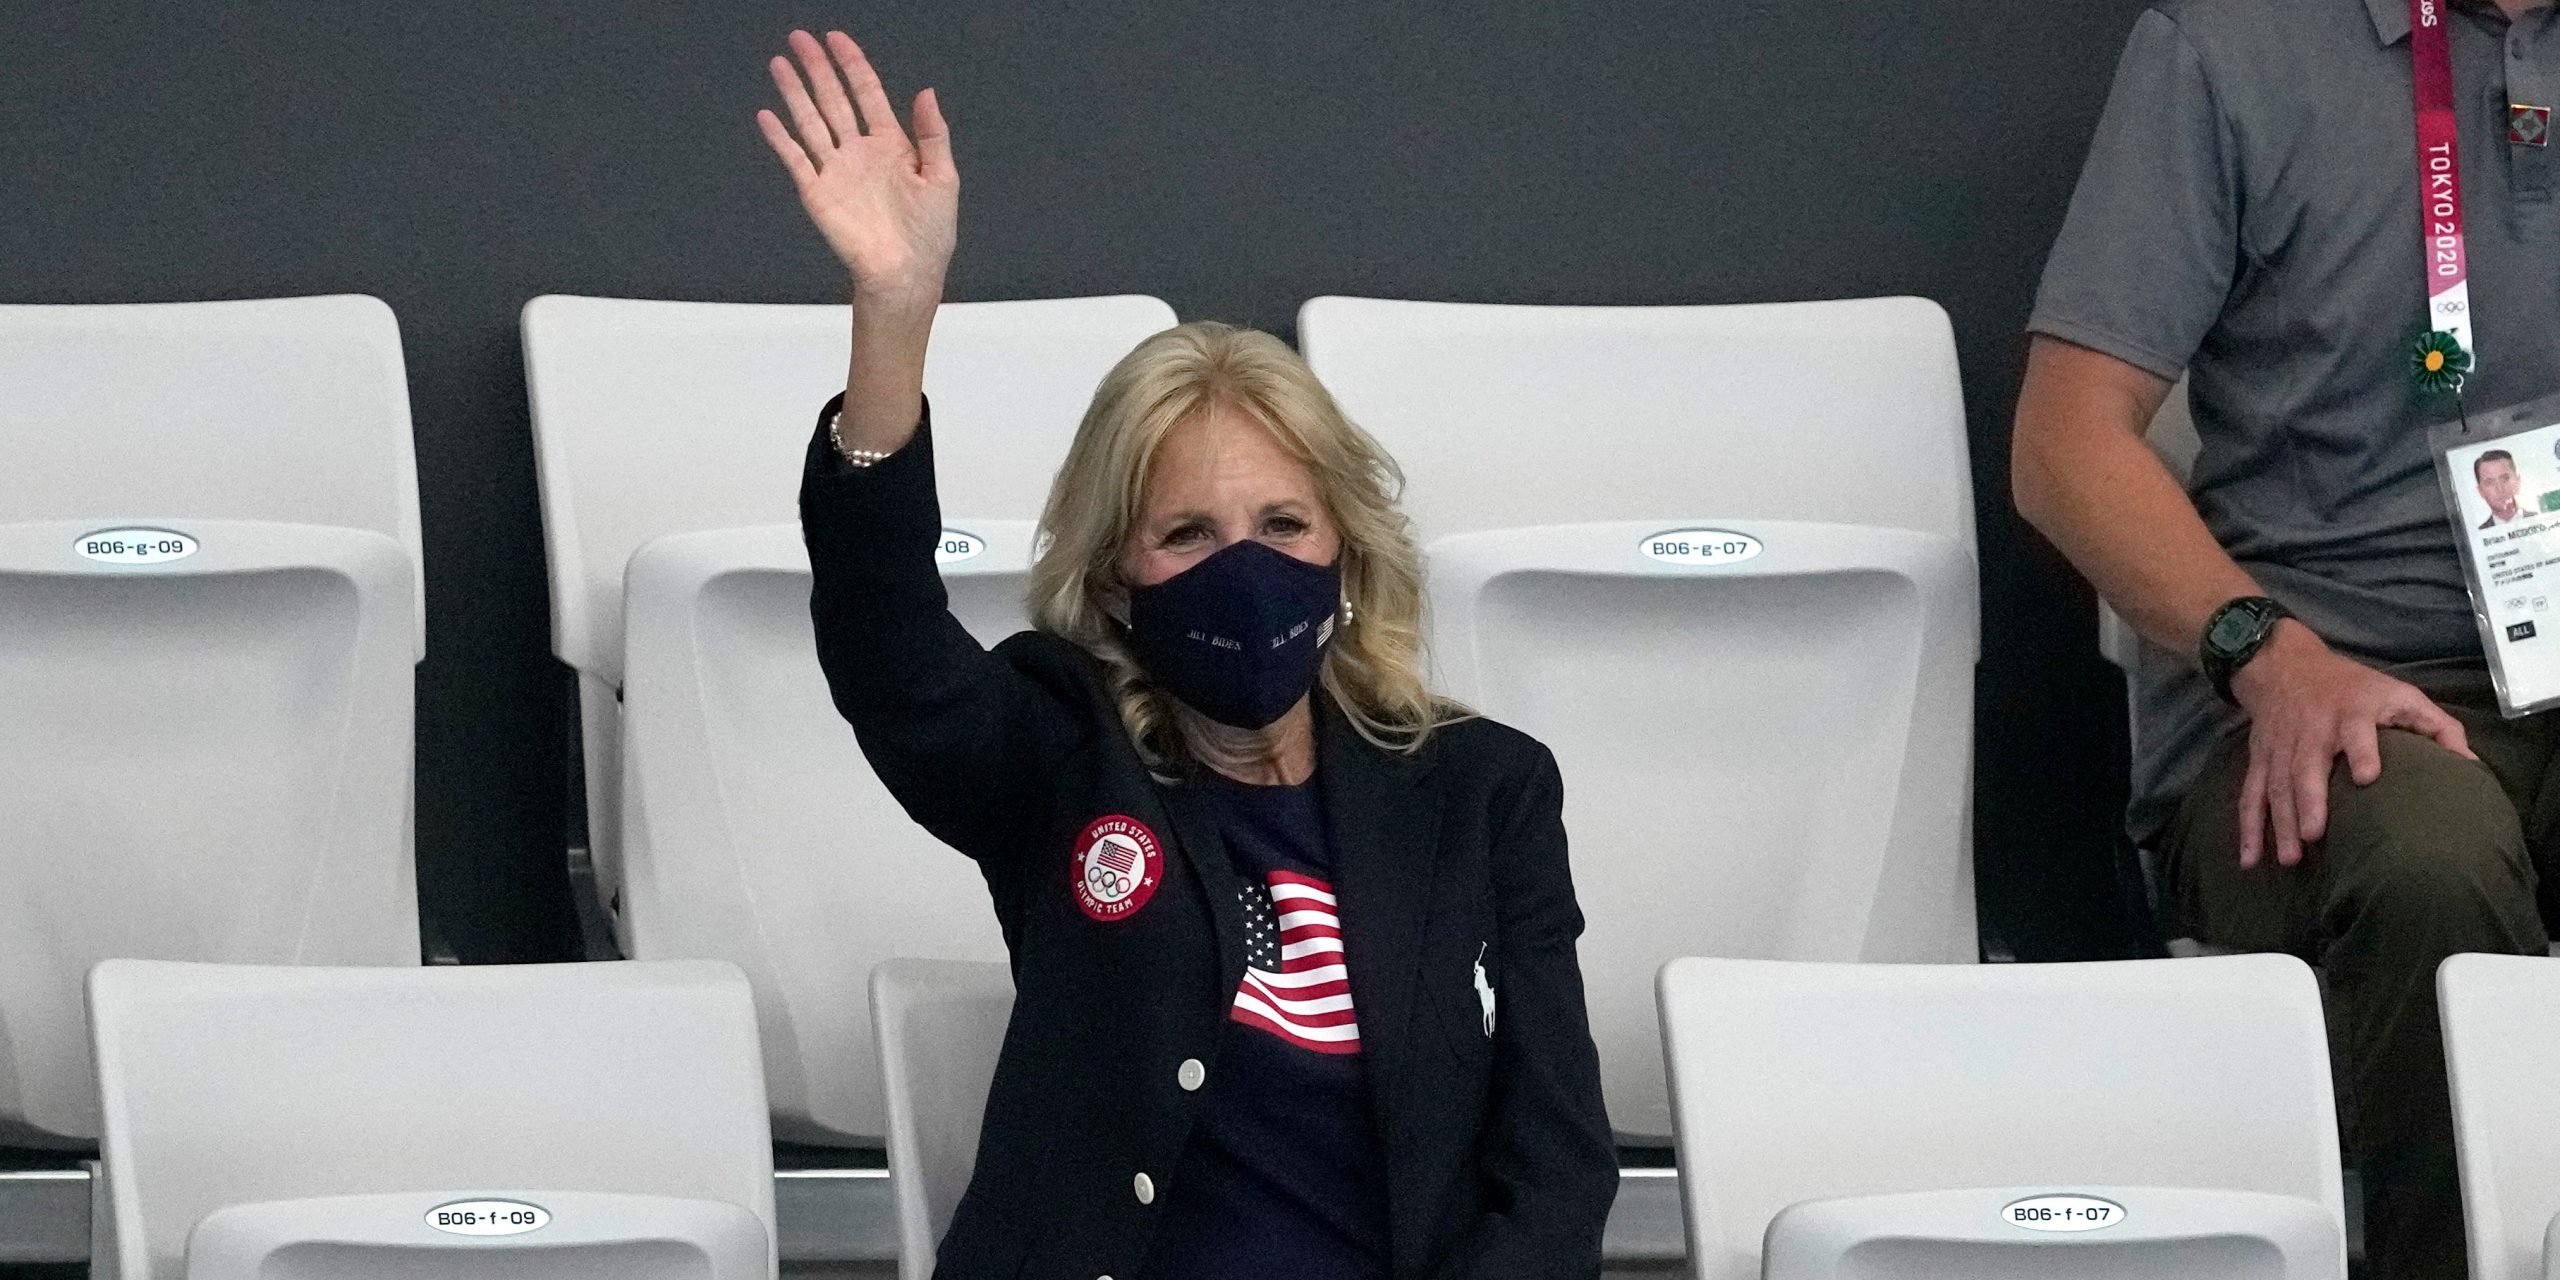 First lady of the United States, Jill Biden waves during a swimming event at Olympics.